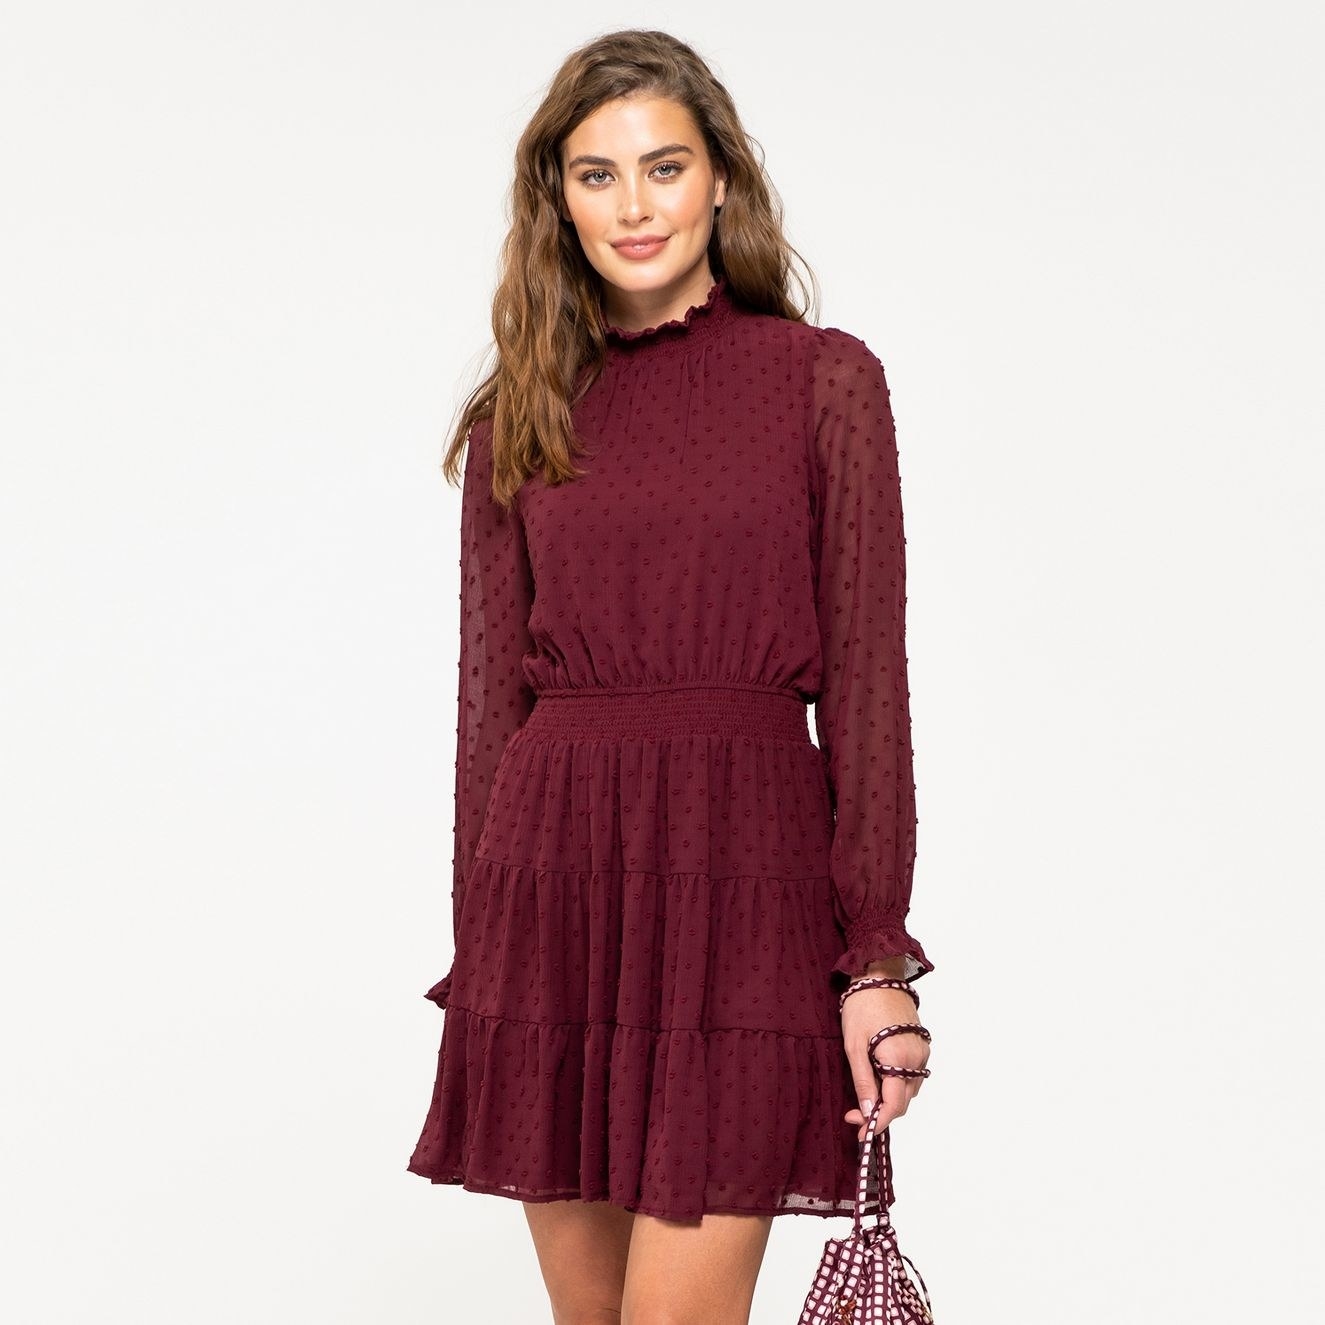 25 Cold Weather Dresses From Target That Are Total Head-Turners